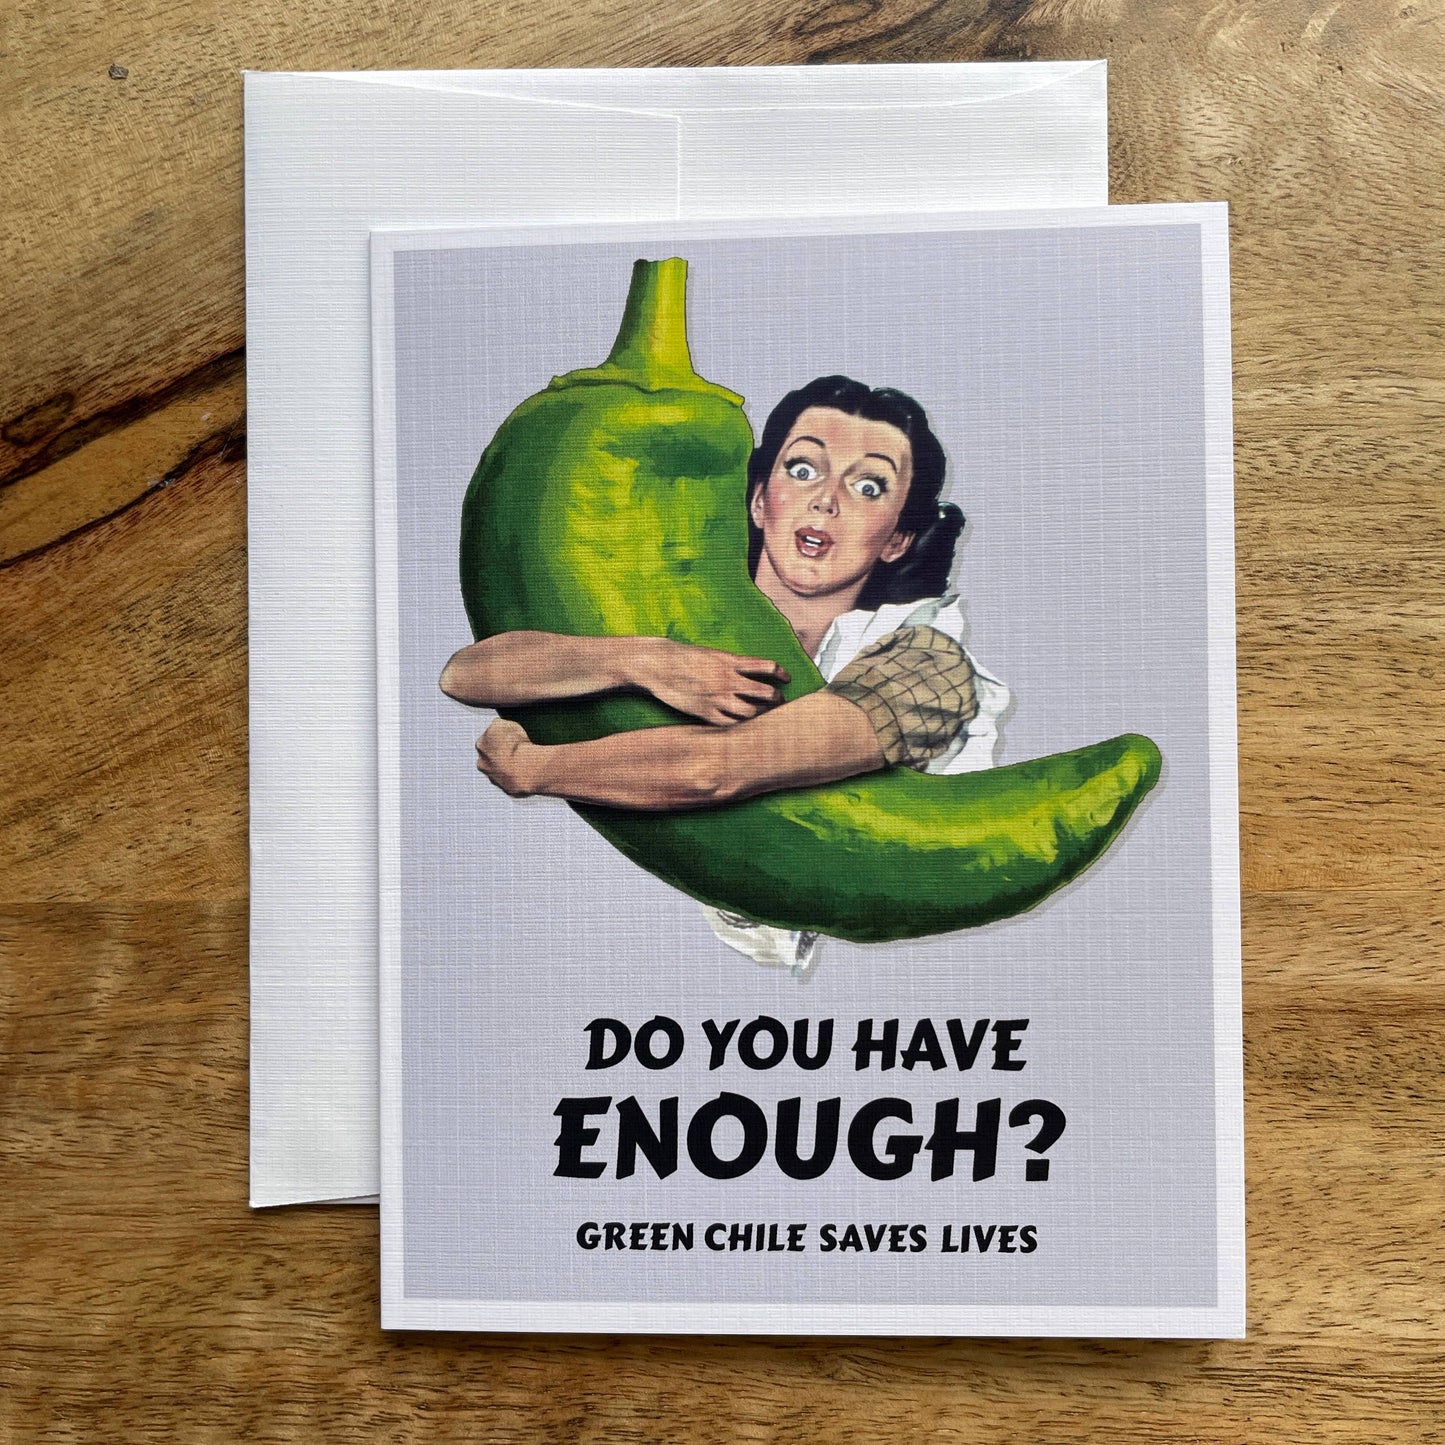 Enough Green Chile? funny greeting card